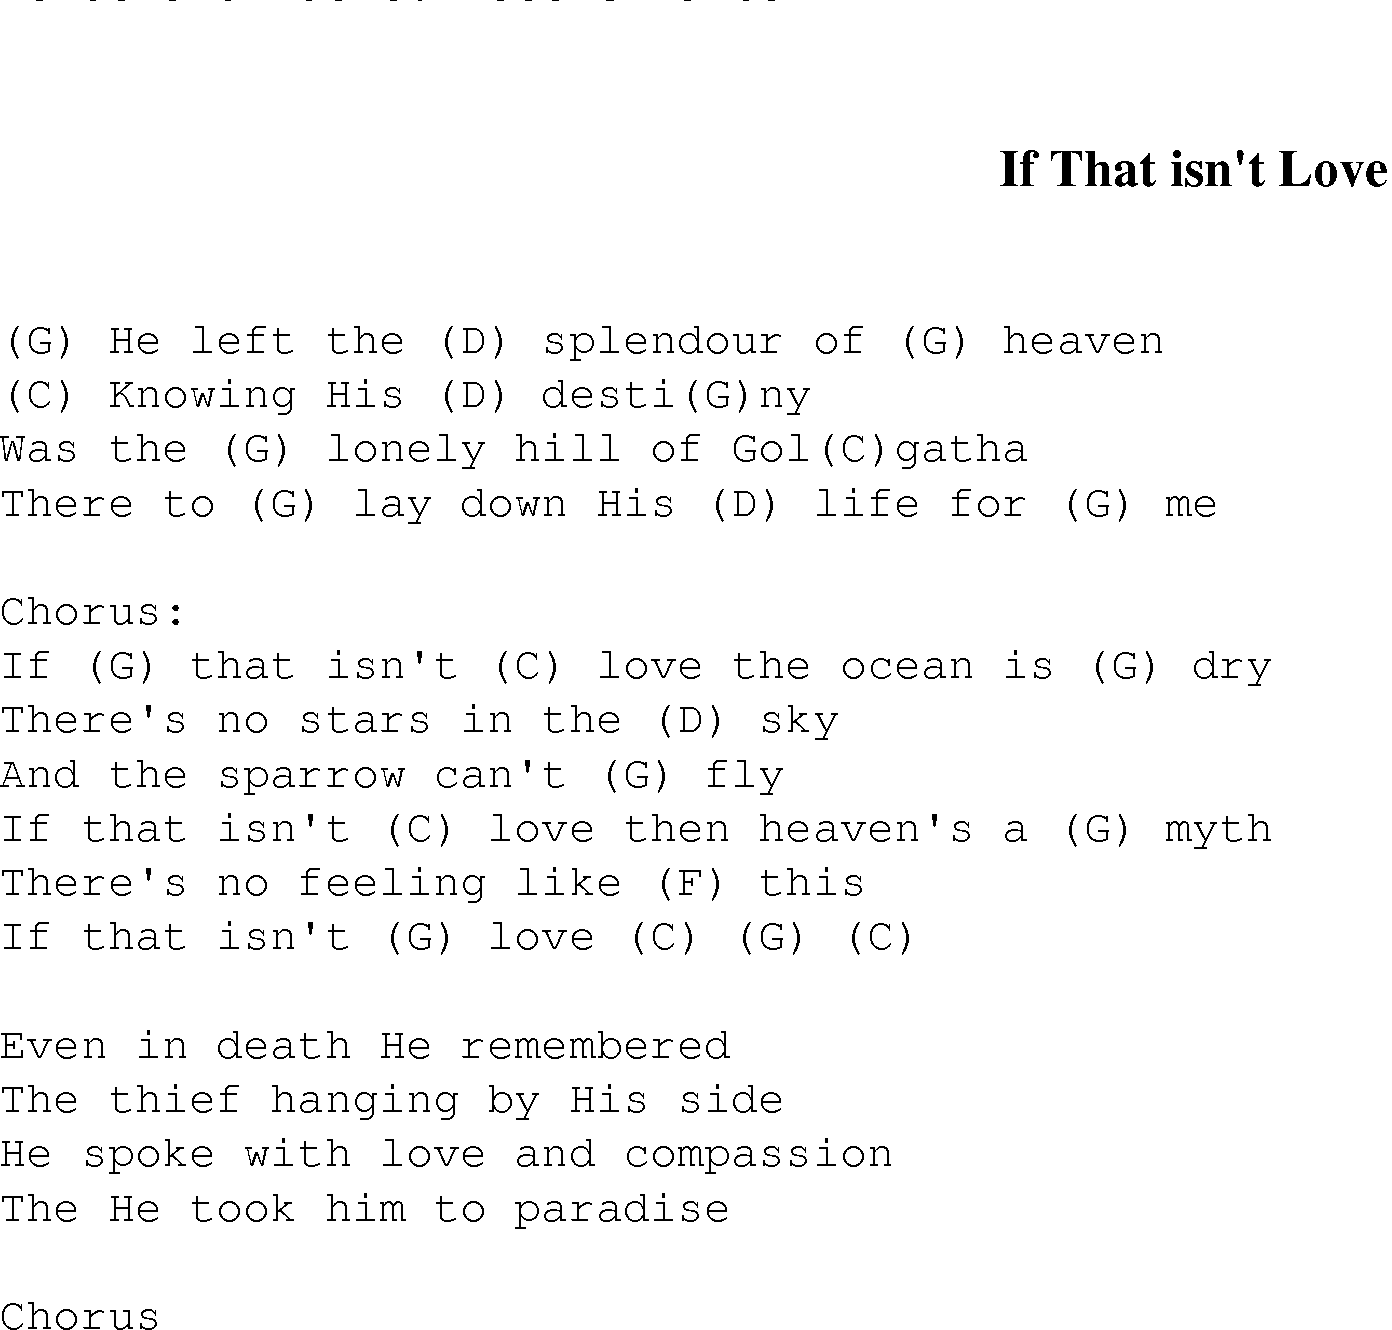 Gospel Song: if_that_isnt_love, lyrics and chords.